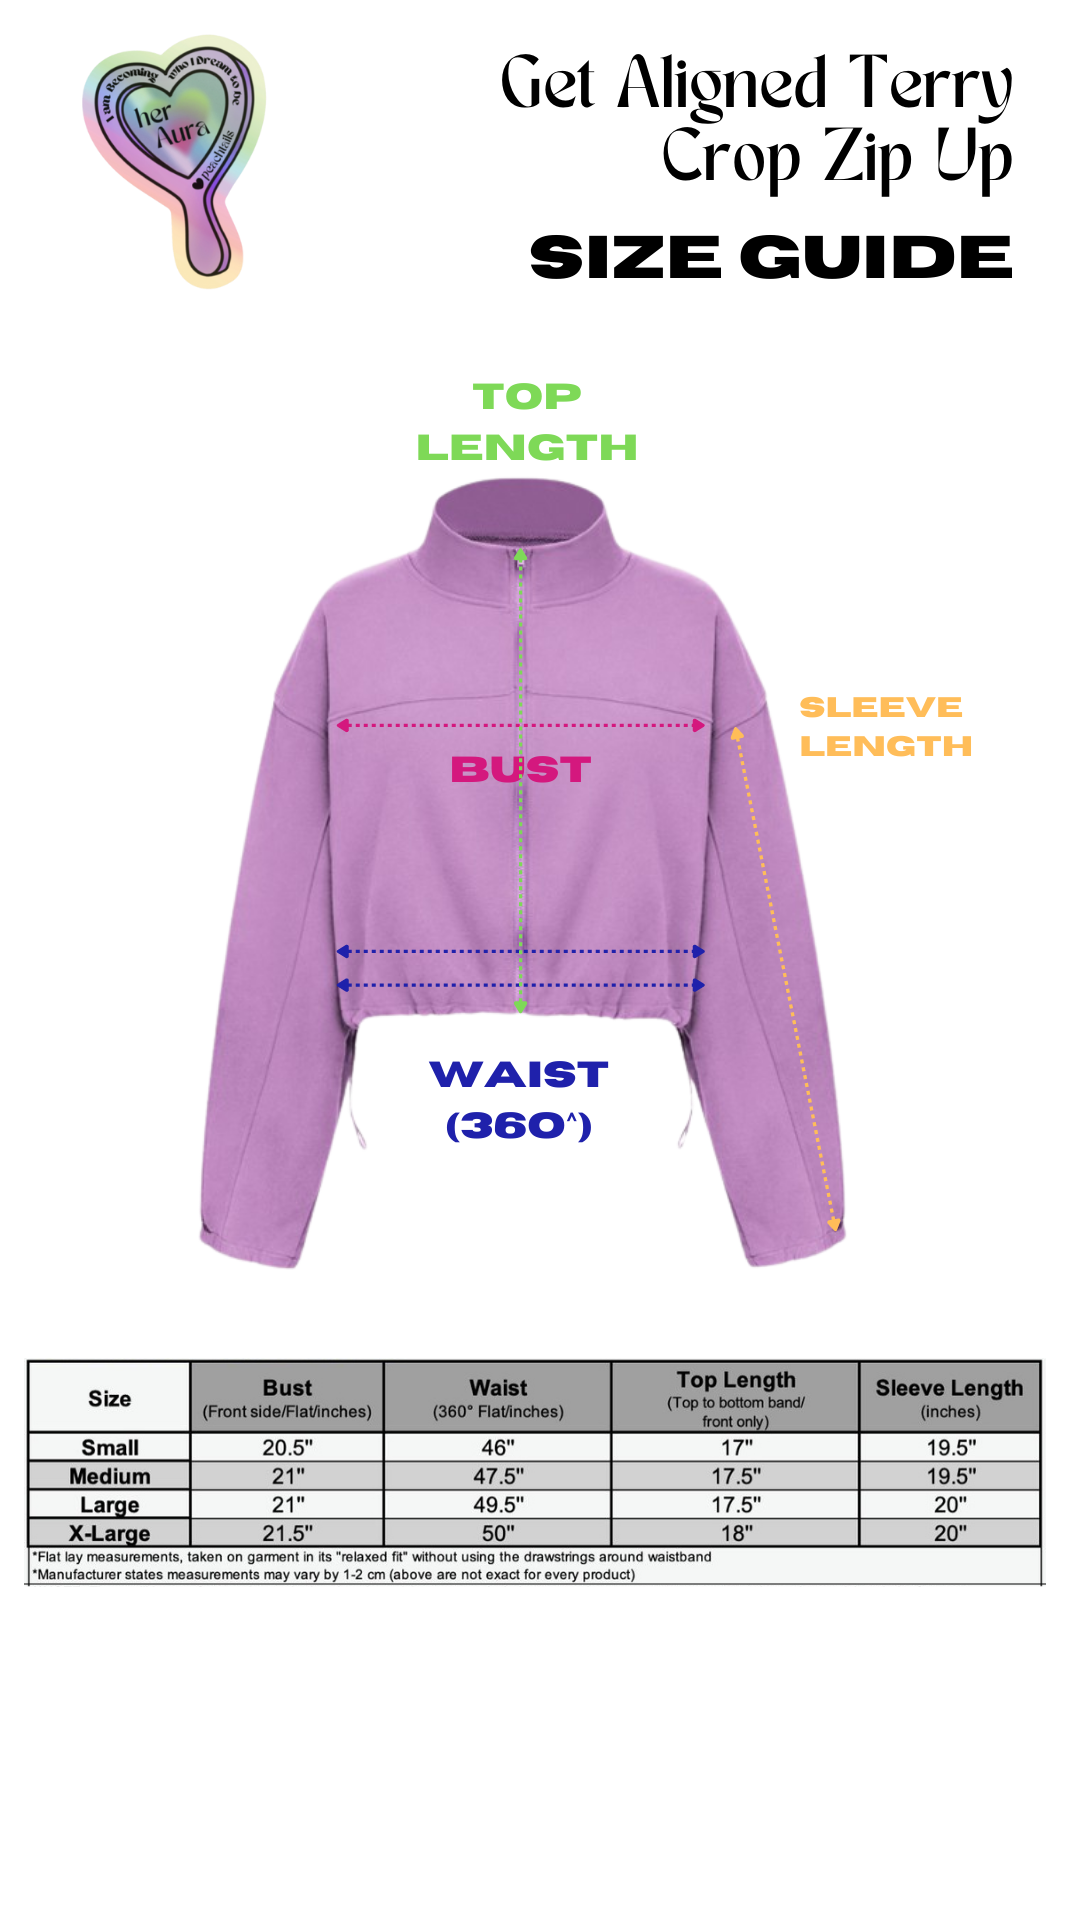 The image is a size guide for the "Get Aligned Terry Crop Zip Up" jacket. It shows a lavender-colored jacket with measurements marked for top length, bust, waist (360°), and sleeve length. Below the image is a table detailing the measurements for sizes small to x-large, with bust sizes ranging from 20.5" to 21.5", waist from 46" to 50", top length from 17" to 18", and sleeve length from 19.5" to 20". Measurement instructions note that the waist is measured at 360° around.